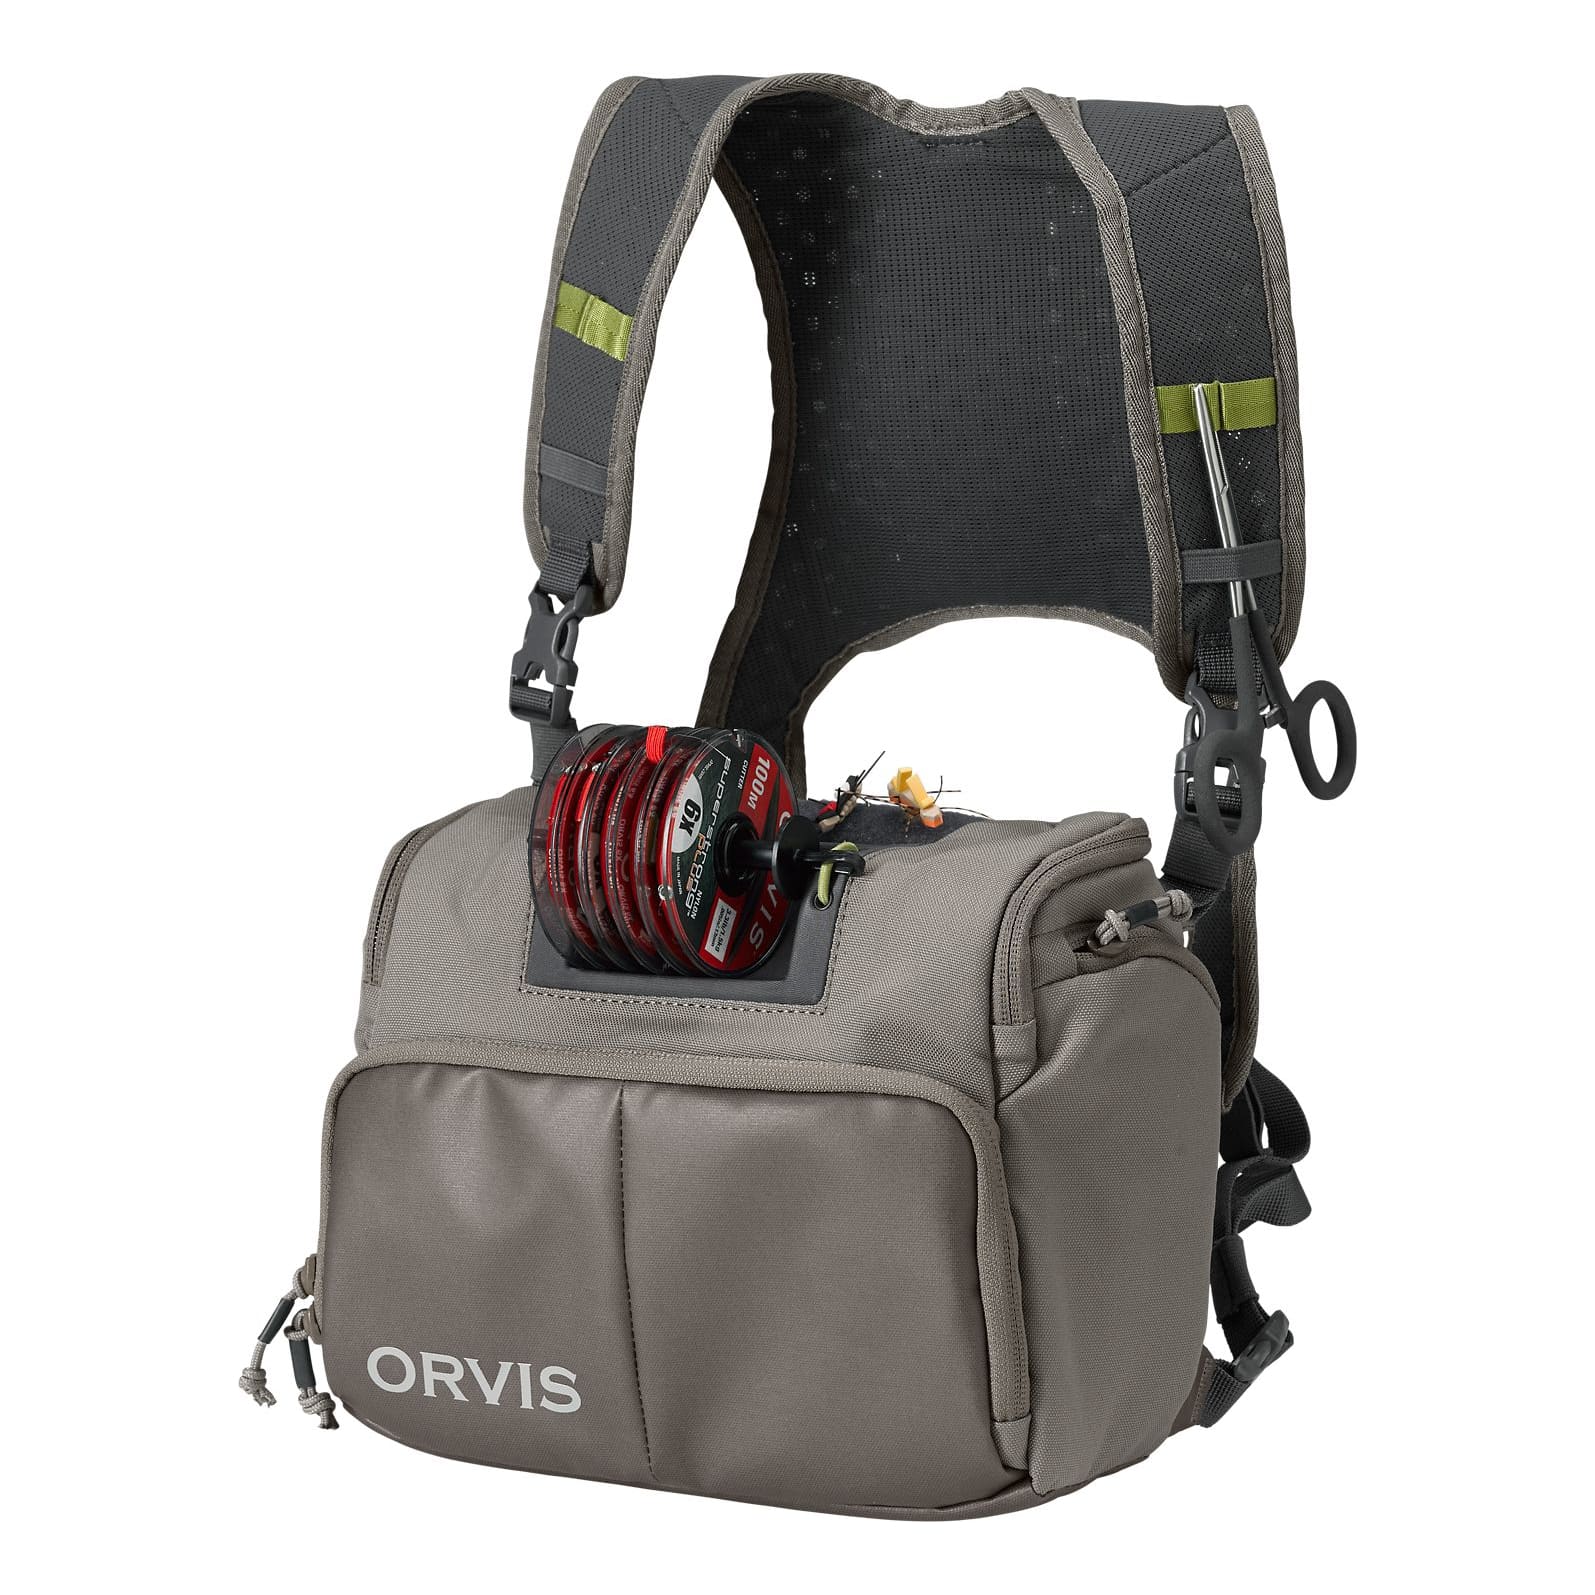 Fly Fishing Bag Fishing Pack Chest Light Weight Travel Breathable